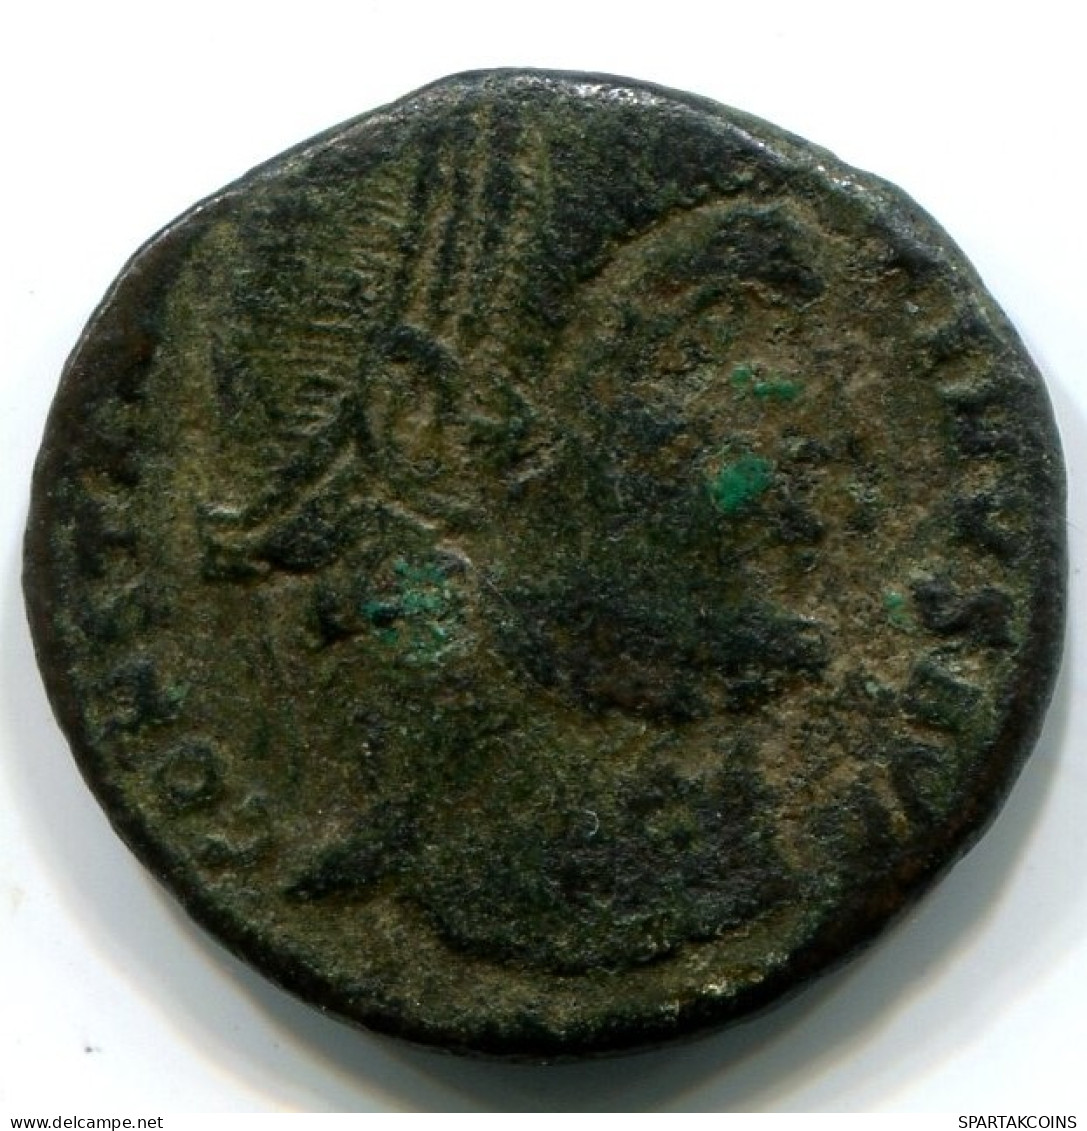 CONSTANTINE I Antioch Mint SMANT AD 326 PROVIDENTIA AVGG Campgate #ANC12452.15.U.A - The Christian Empire (307 AD Tot 363 AD)